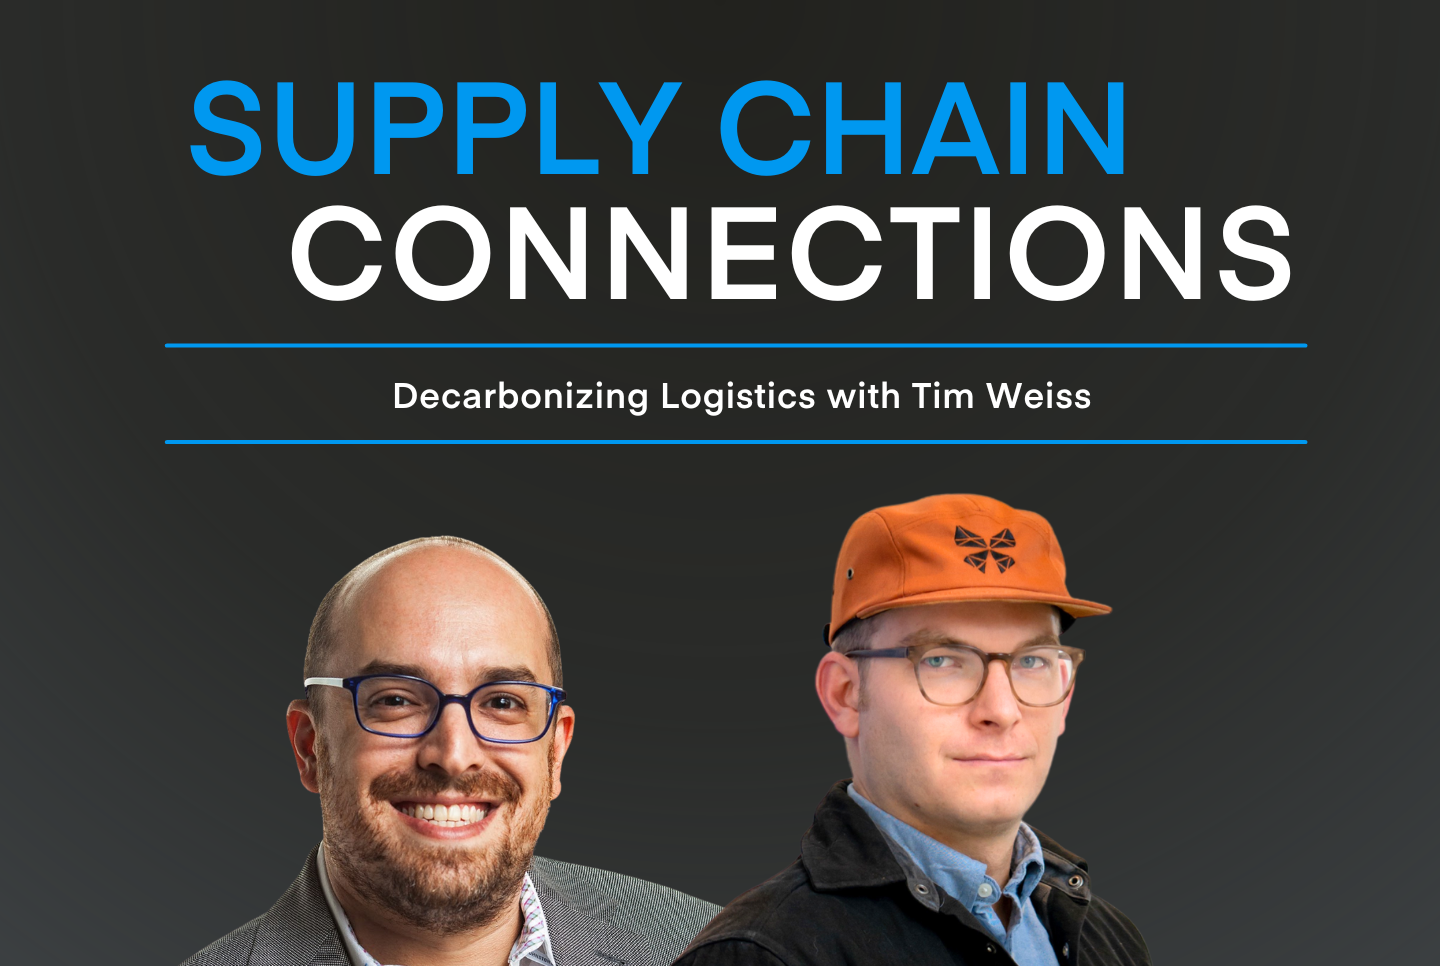 Decarbonizing logistics with tim weiss